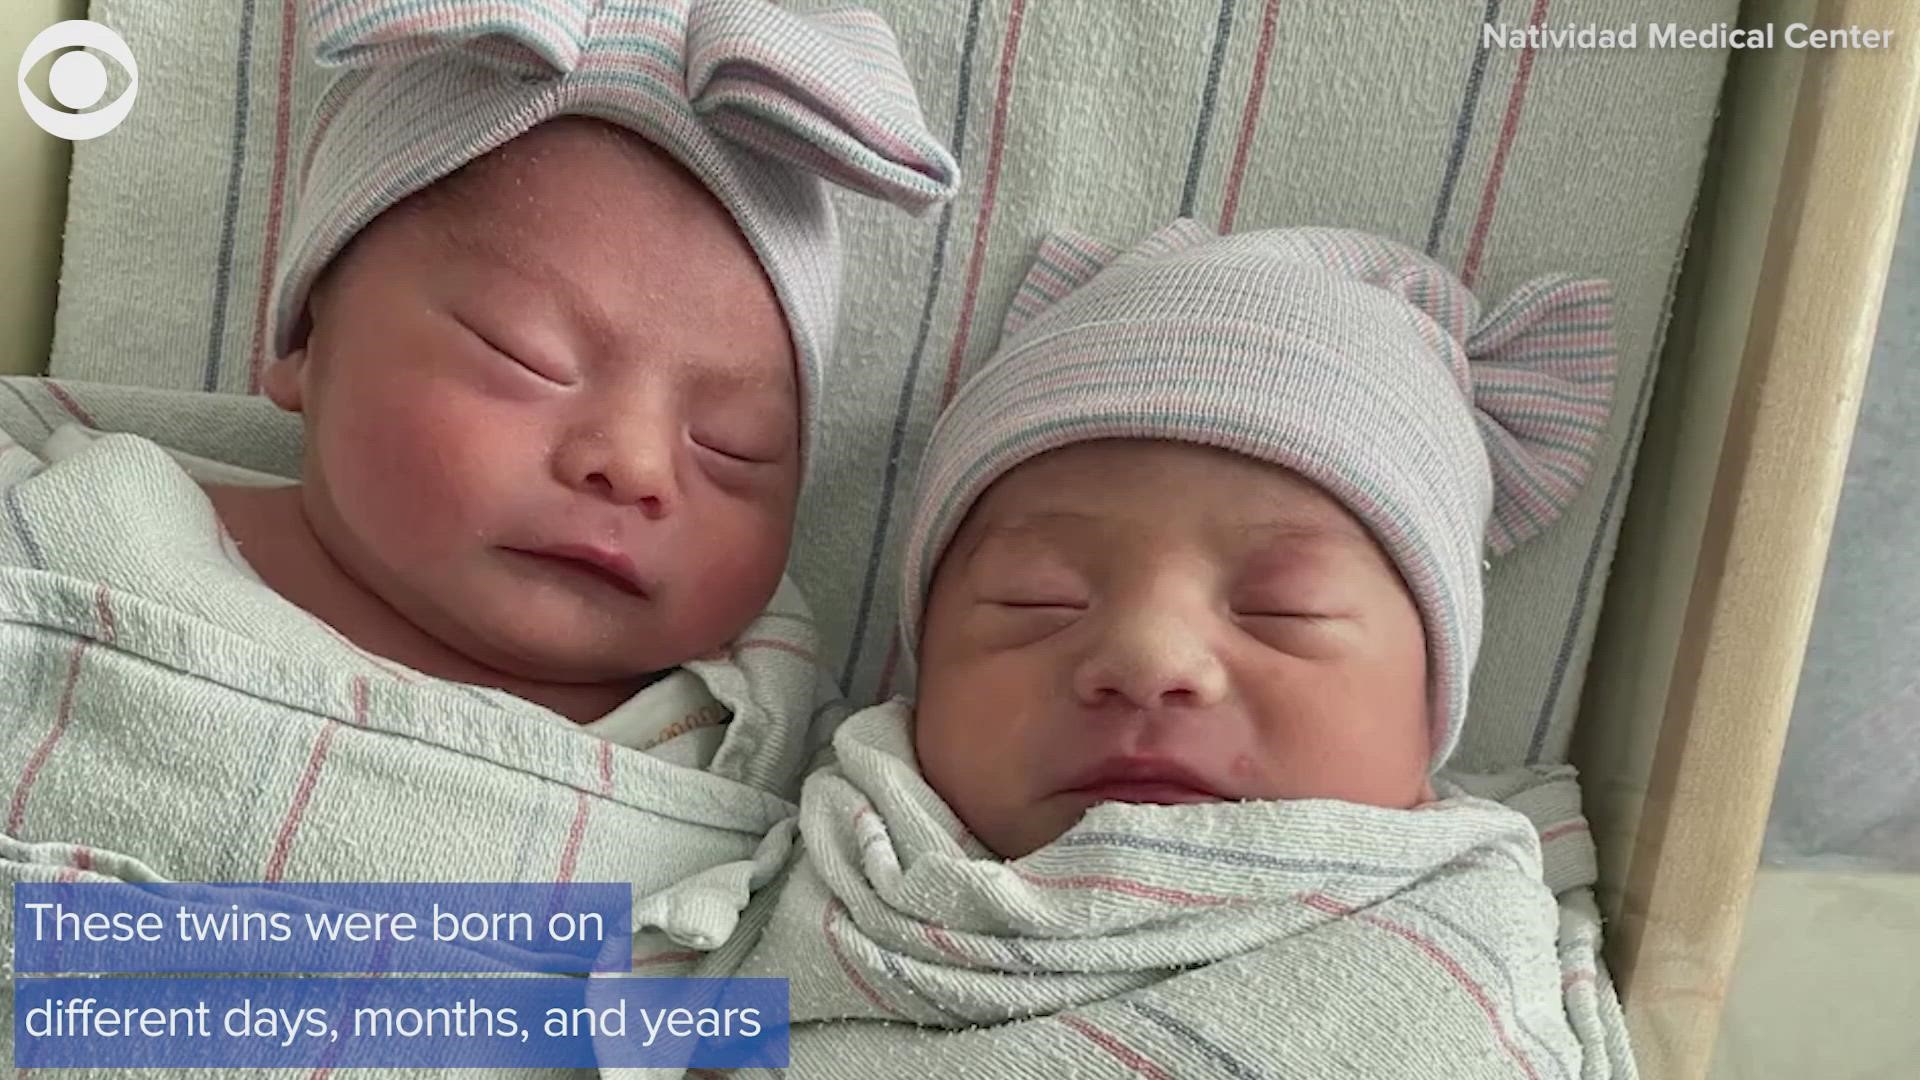 The twins, born in 2021 and 2022, will now head home to meet their three older siblings.